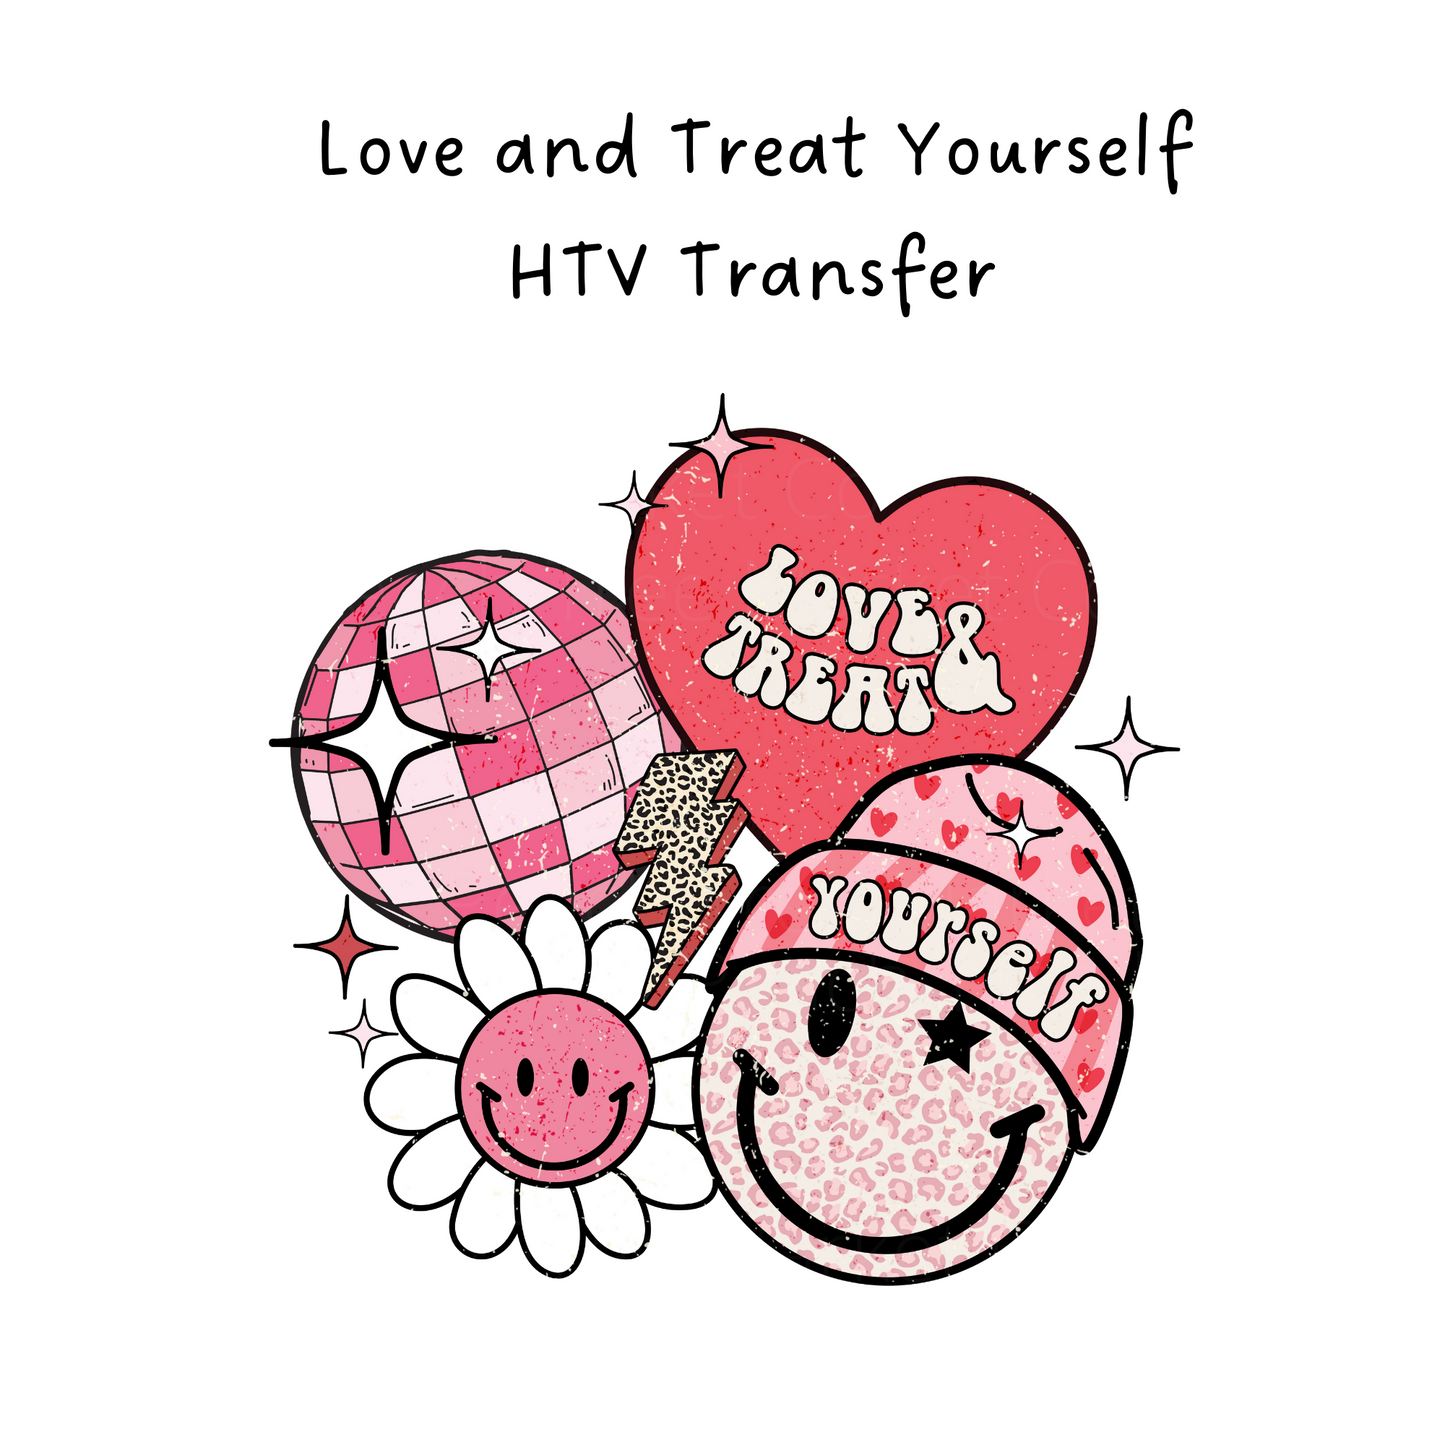 Love and Treat Yourself HTV Transfer